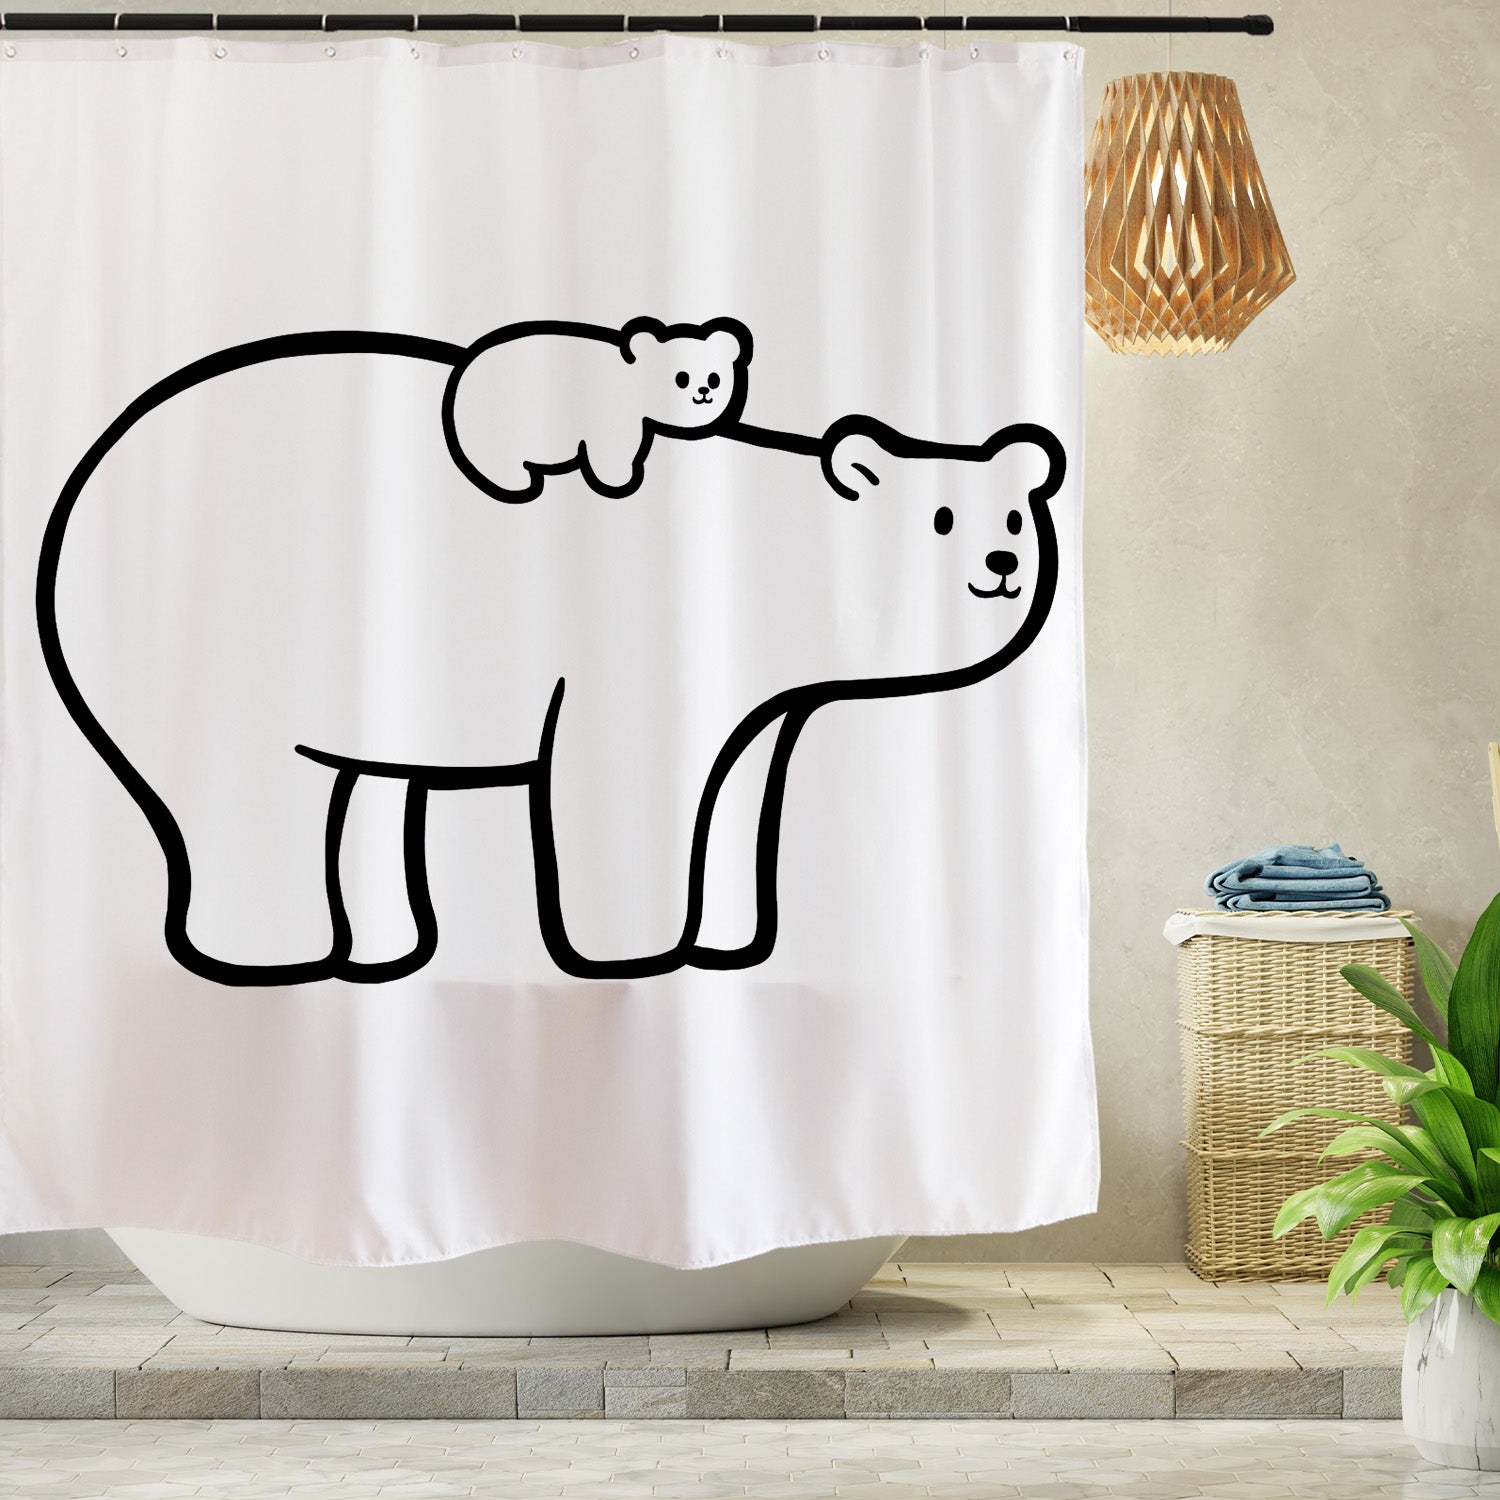 Feblilac Polar Bear Mother and Child Shower Curtain with Hooks